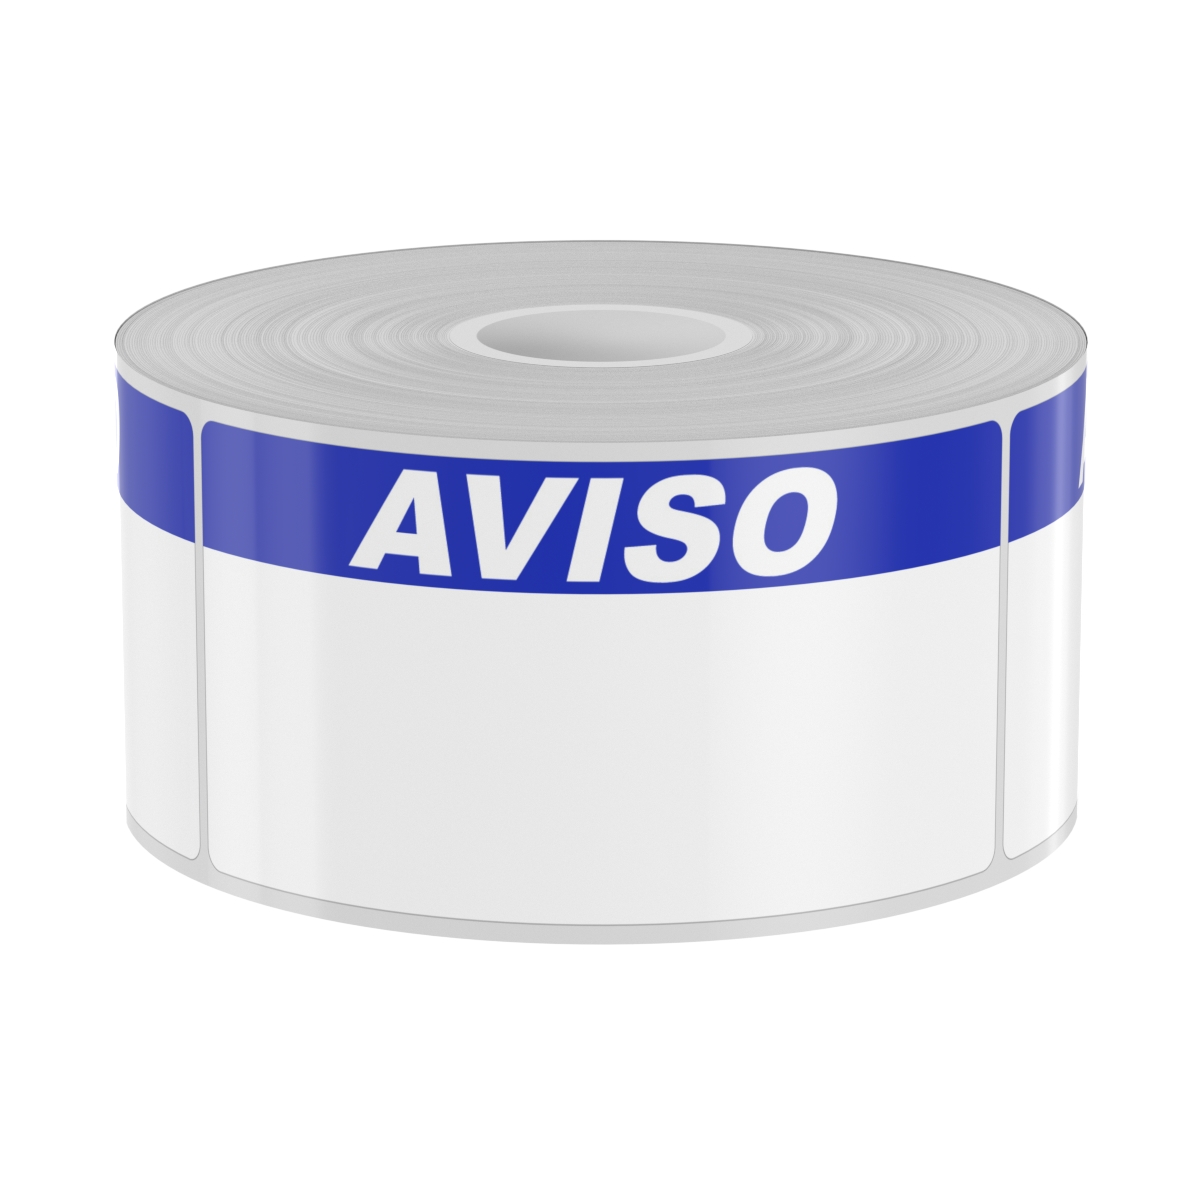 250 2in x 4in Labels with Blue AVISO Header